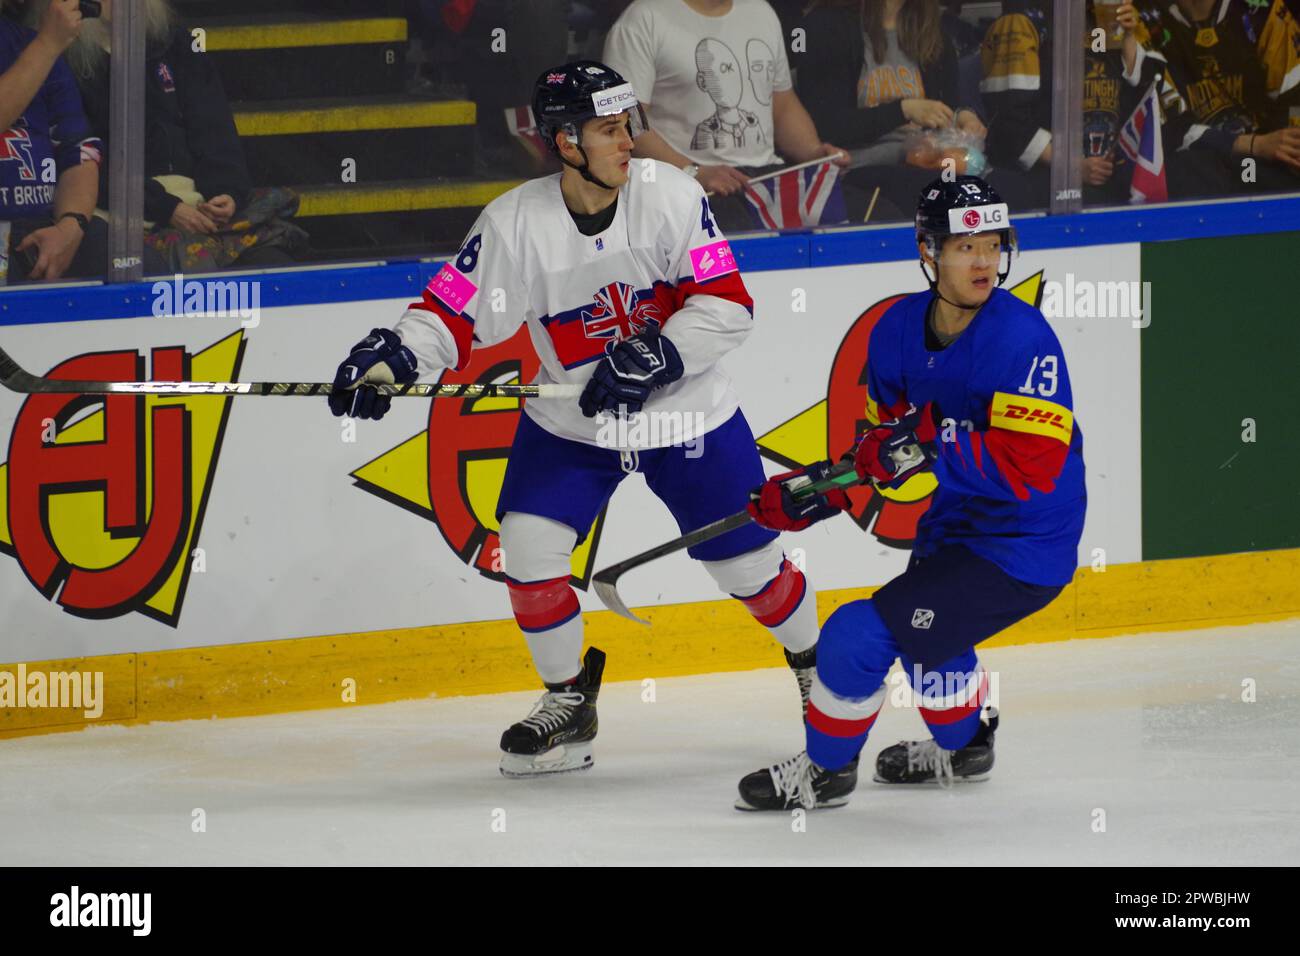 Nottingham, UK. 29 April 2023. Johnny Curran playing for Great Britain and Young Jun Lee playing for Korea during a match in the 2023 IIHF Ice Hockey World Championship, Division I, Group A tournament at the Motorpoint Arena, Nottingham.  Credit: Colin Edwards/Alamy Live News Stock Photo